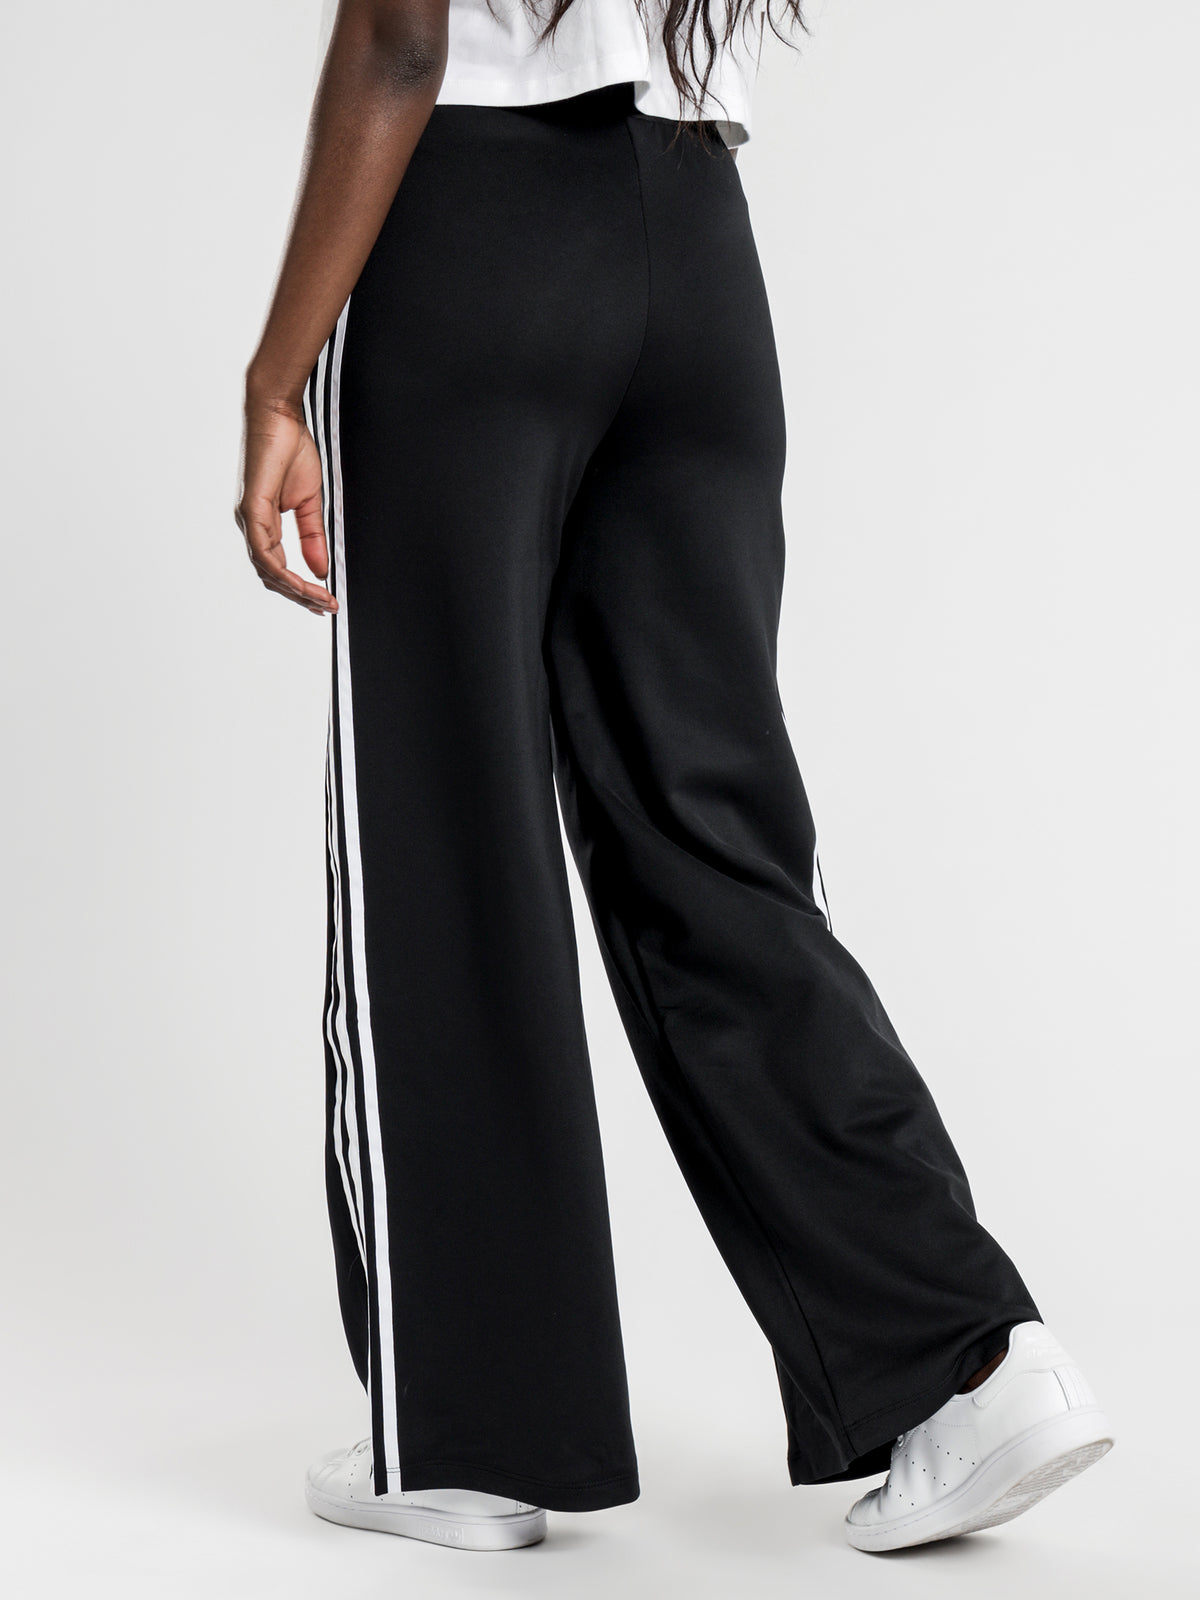 Primeblue Relaxed Wide Leg Pants in Black